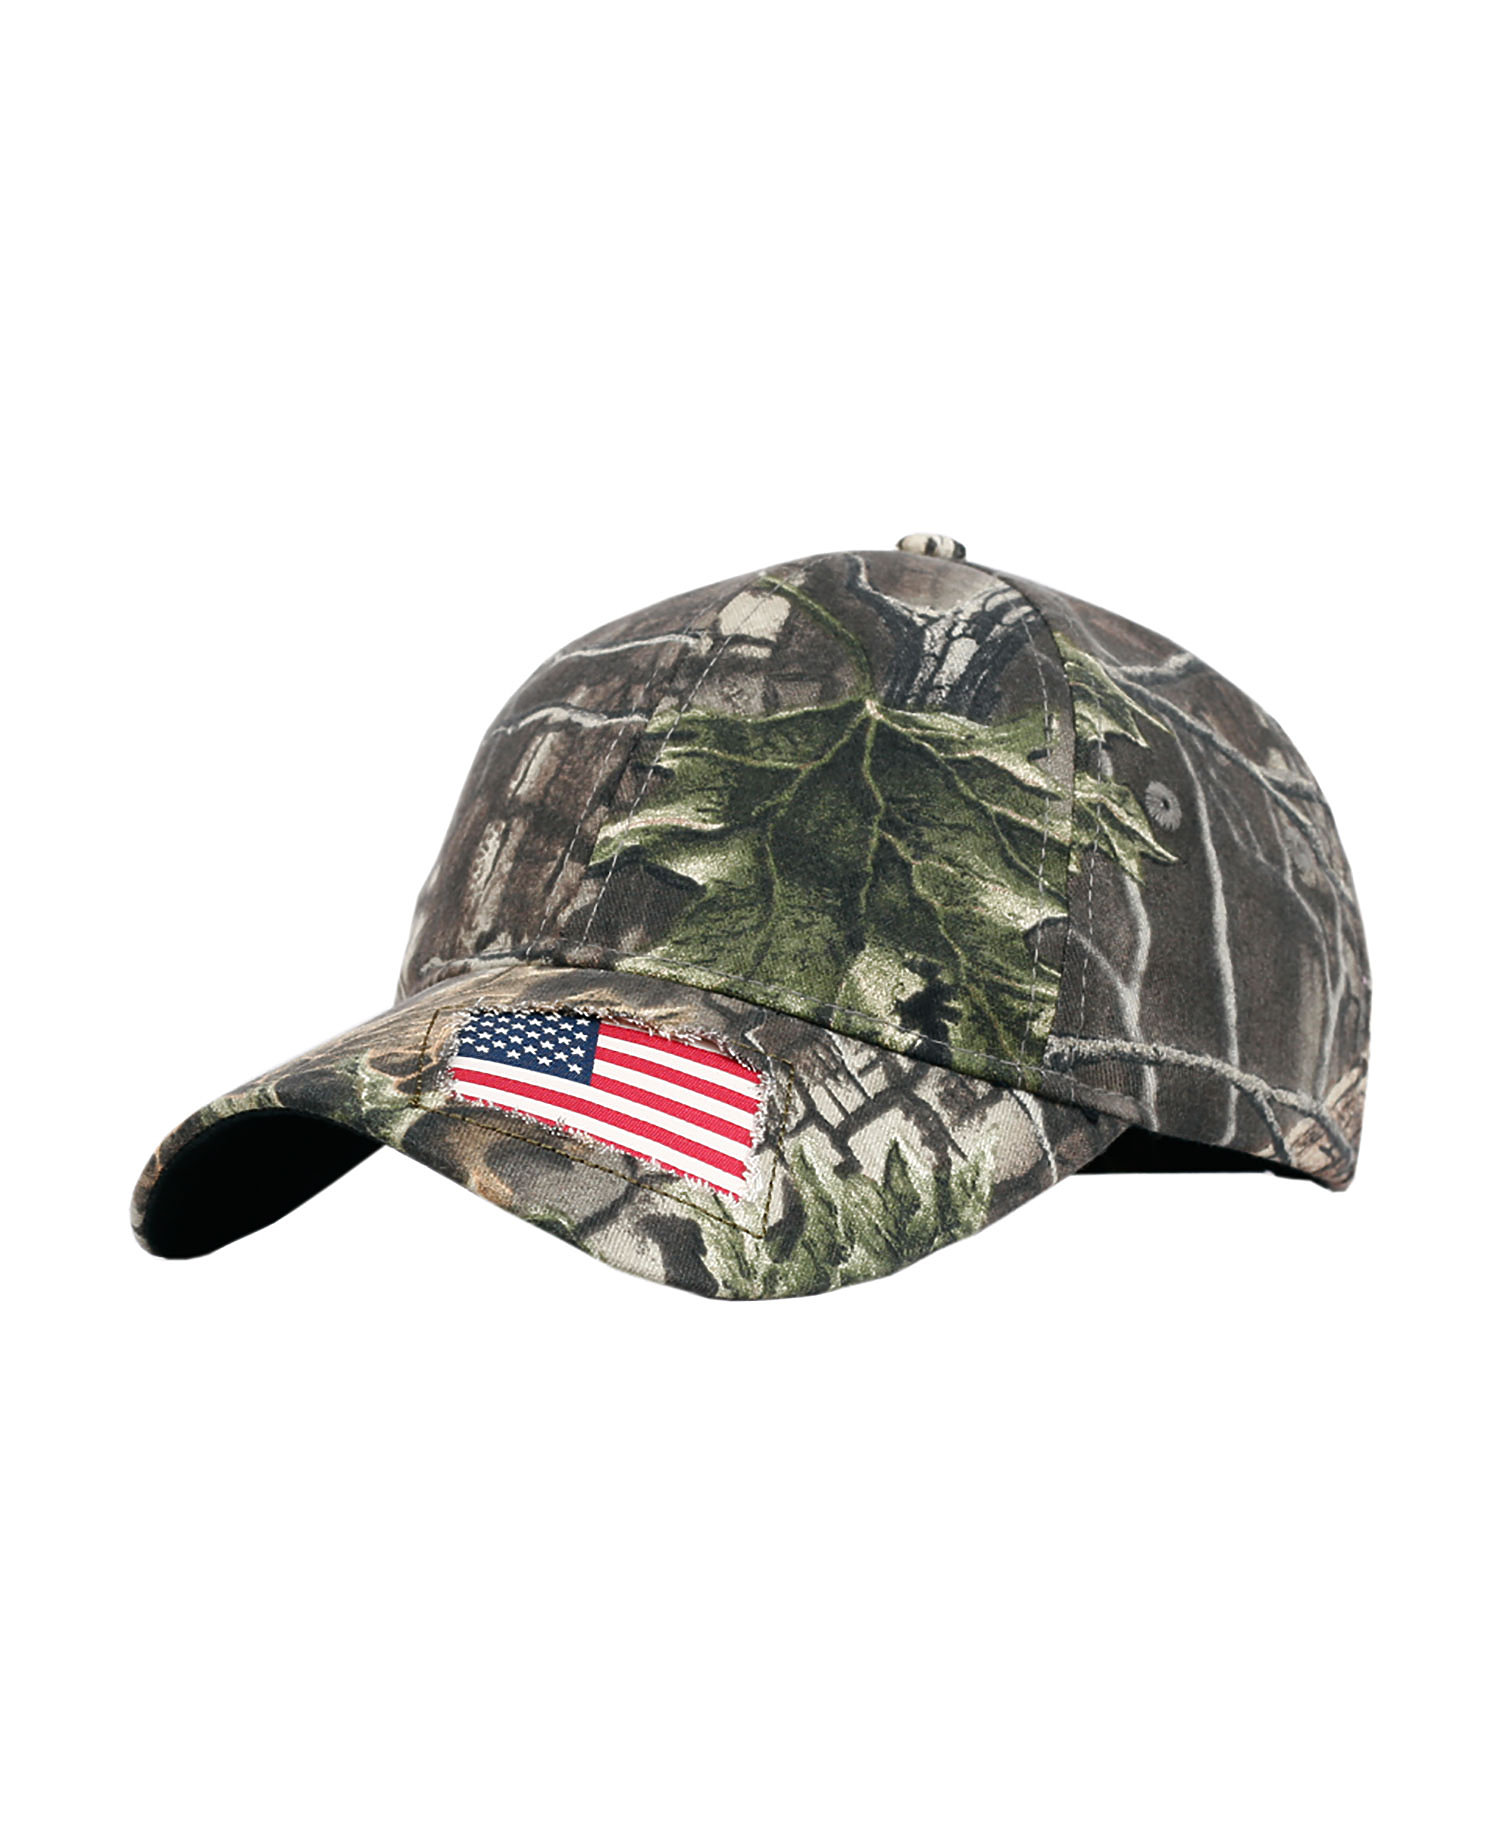 Fahrenheit F0792 - Superflauge Camo with Woven Flag Accent